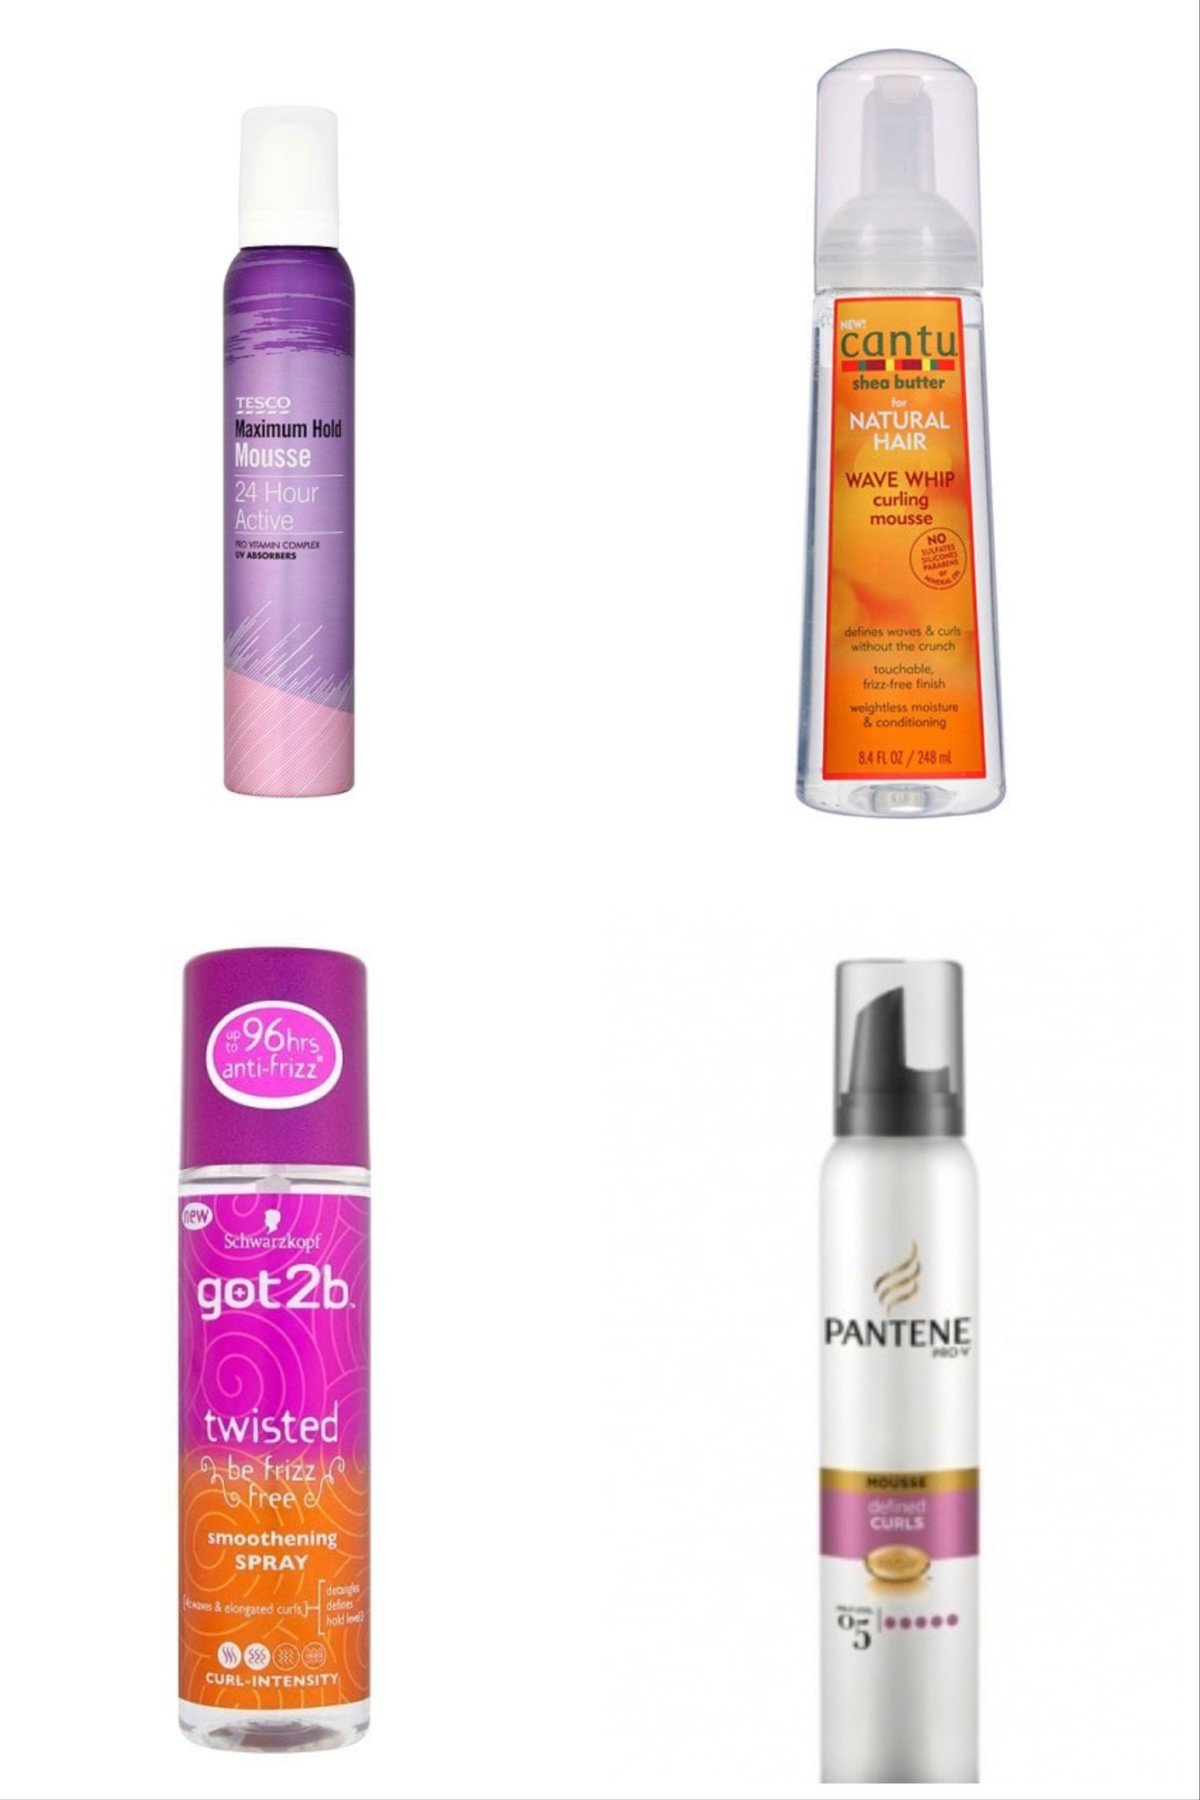 Curly Girl method styling mousse and sprays in UK supermarkets and drugstores